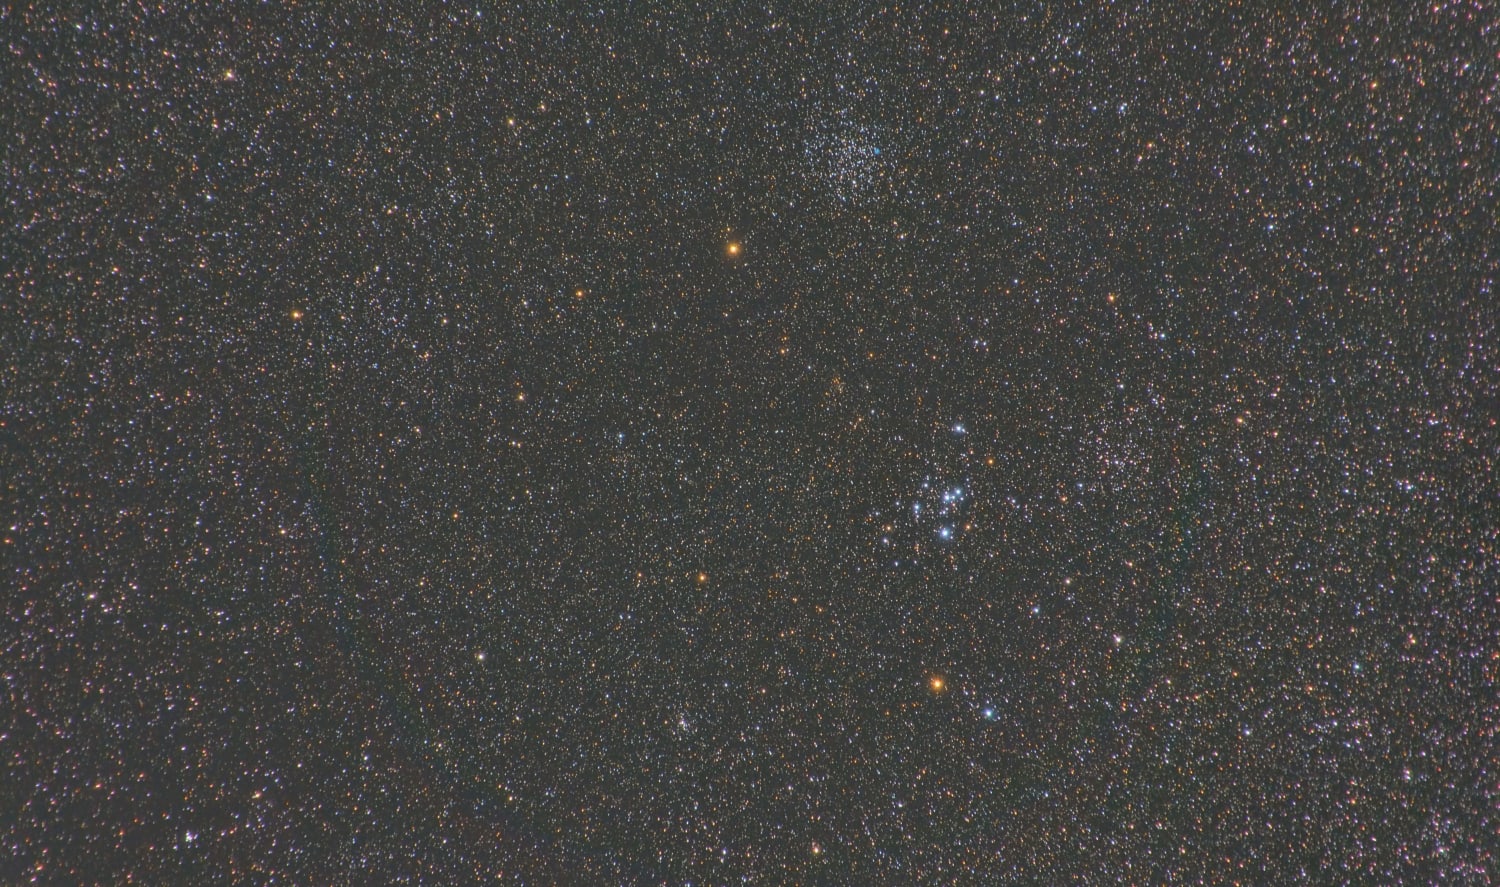 M46, M47, and NGC 2438 – Two star clusters and a planetary nebula